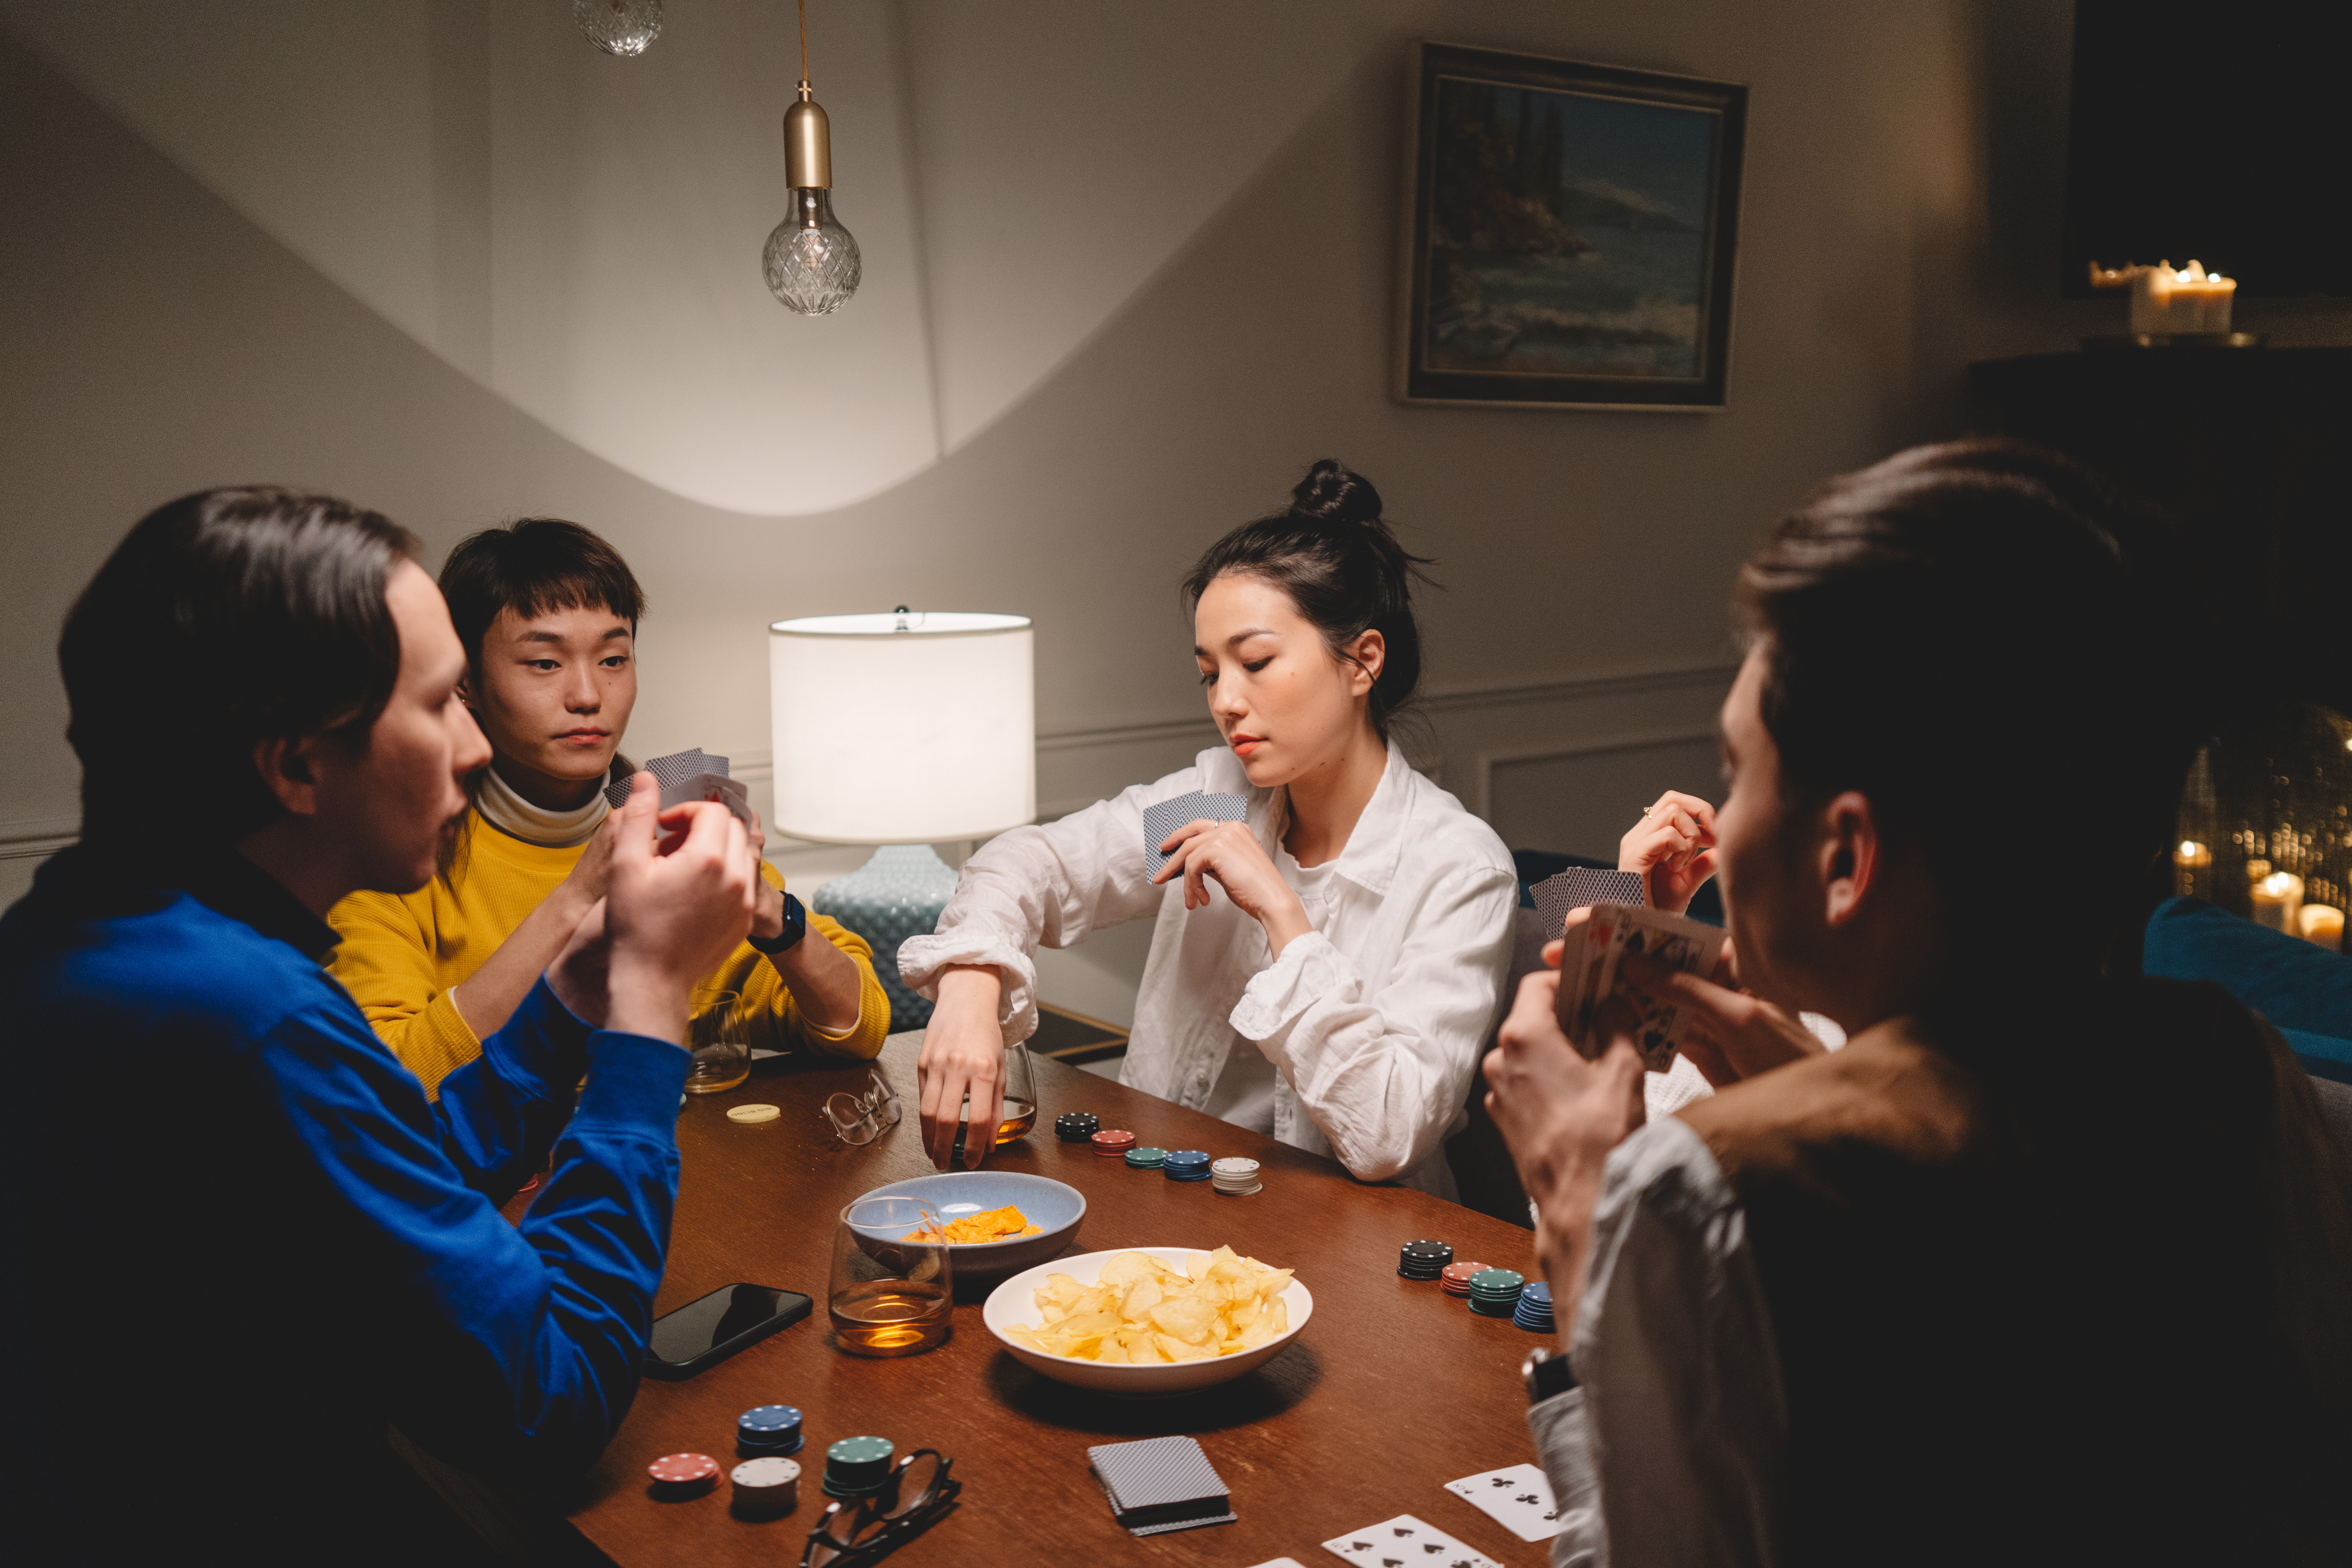 How to Set Up a Poker Group with Friends